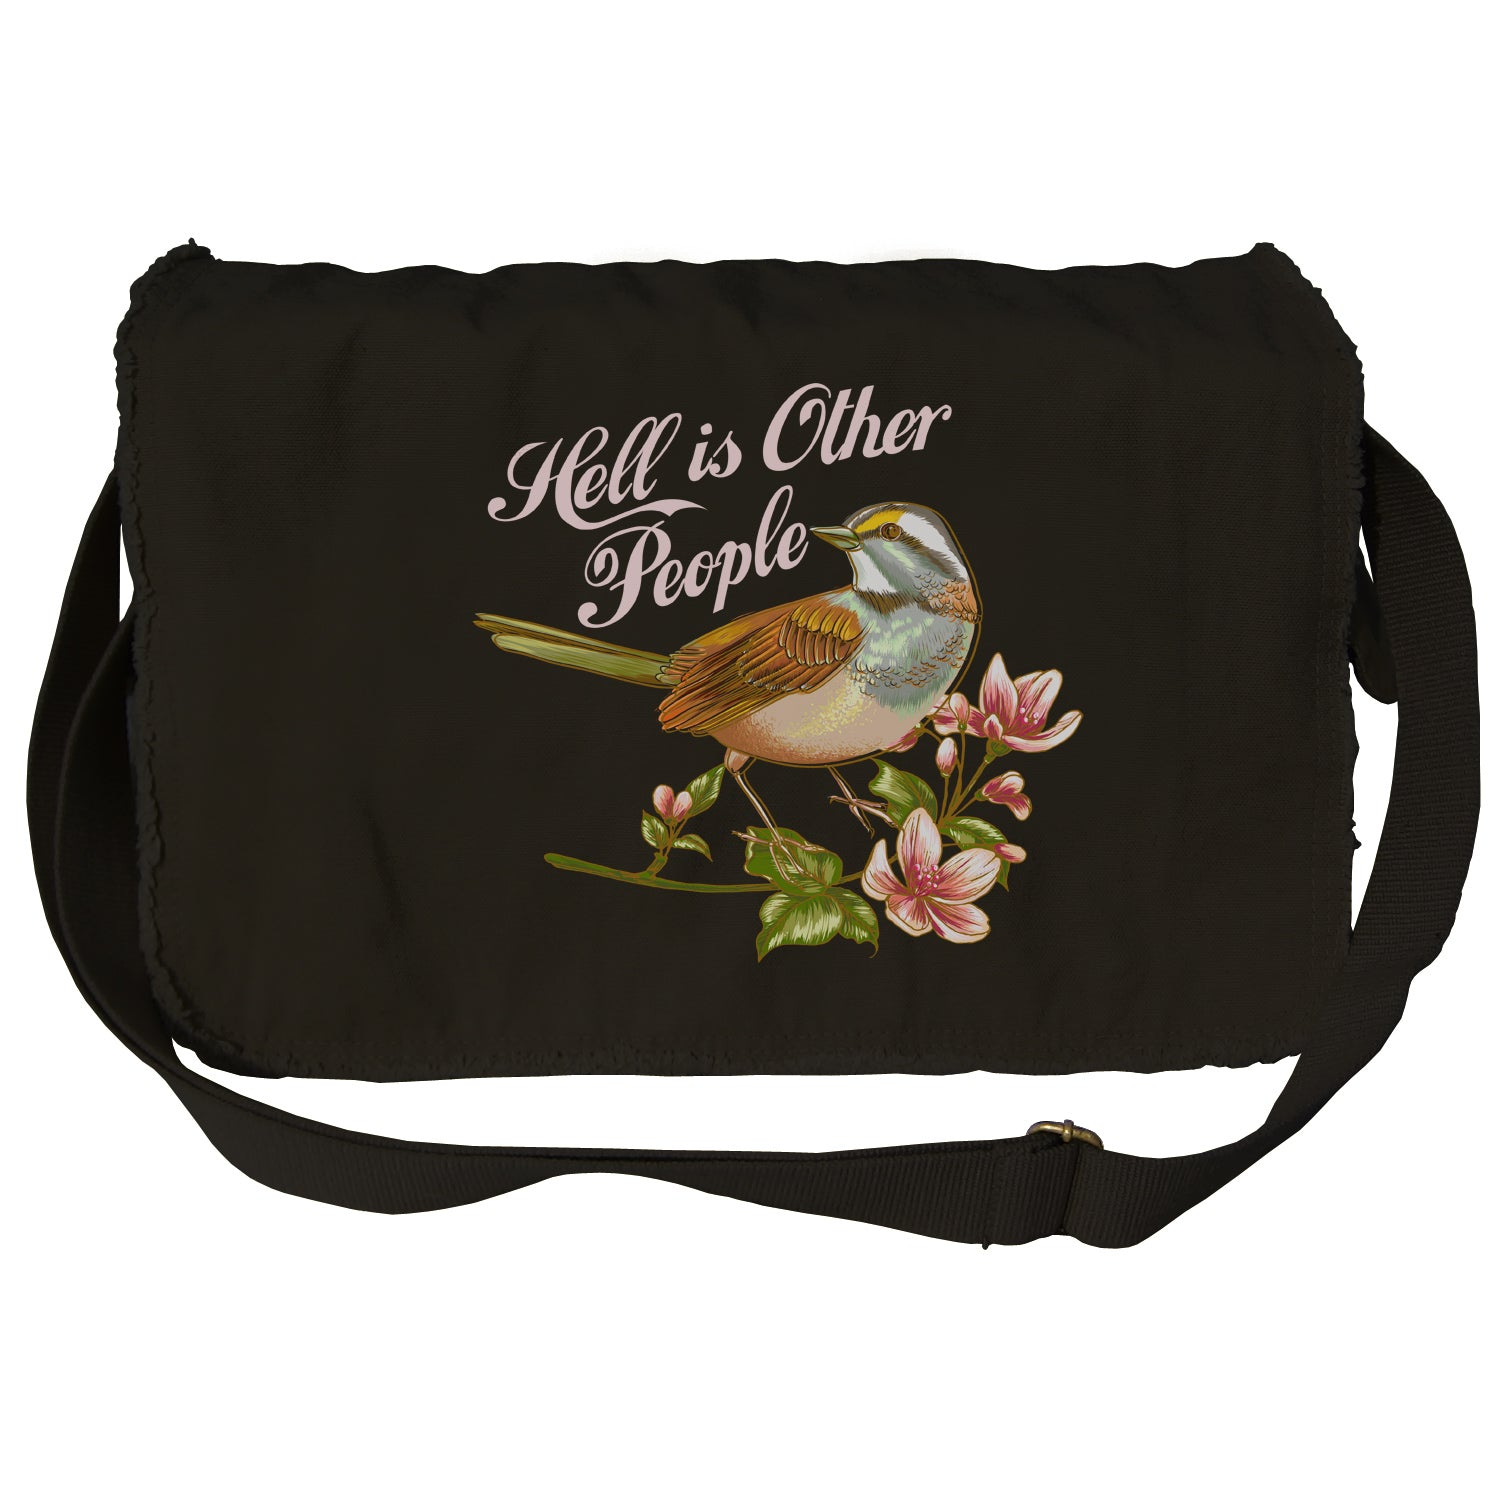 Hell is Other People Messenger Bag